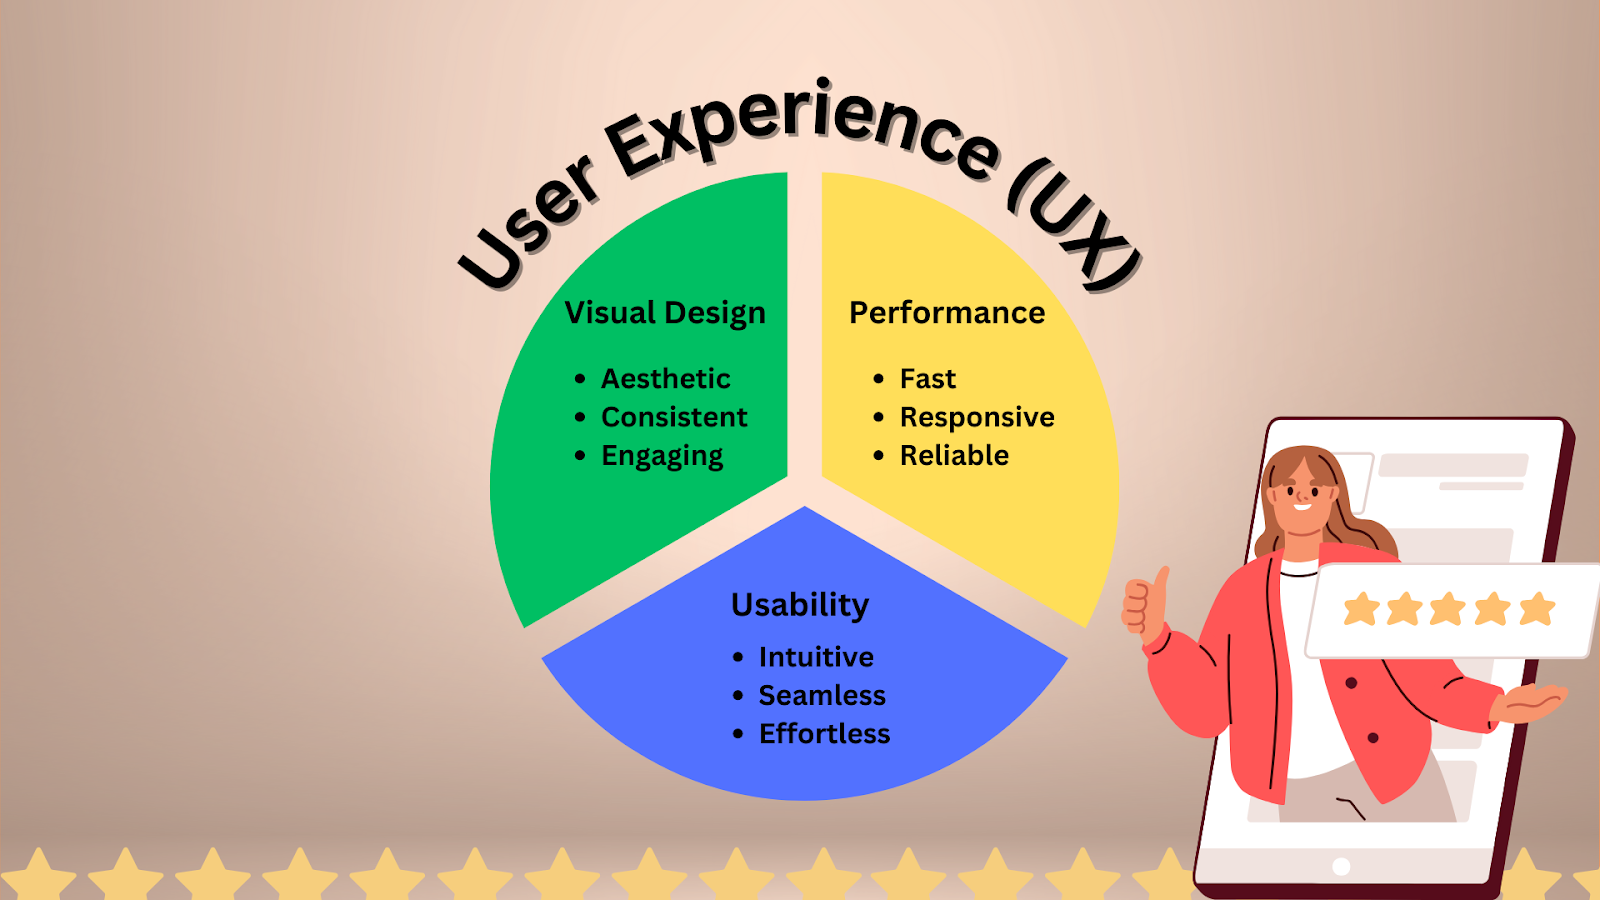 One of the best practices for SaaS website is to evaluate website performance with a SaaS website audit. Here are three important facets of user experience (UX) - virtual design, performance, and usability. Read the full guide for the other 10 steps of our SaaS marketing audit 101 guide.